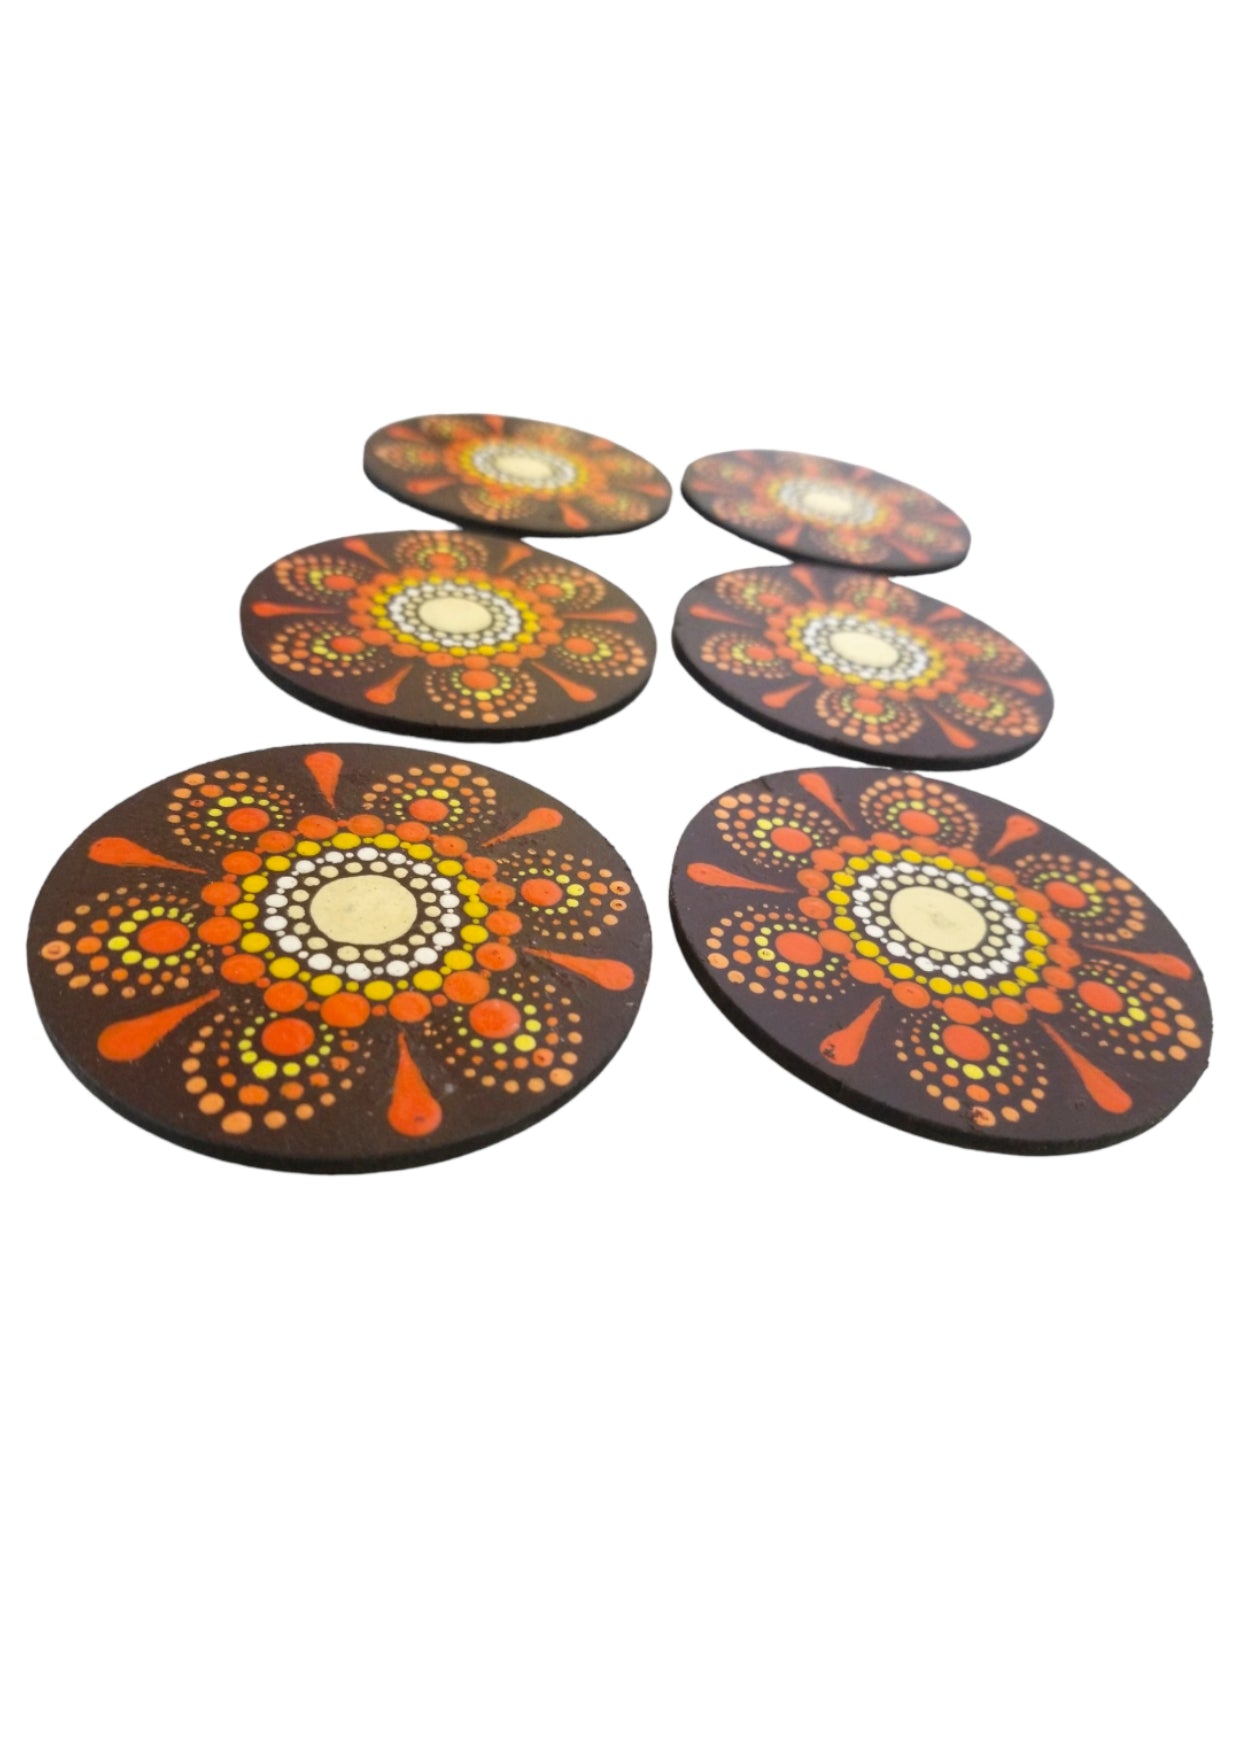 Artistter Coaster Set of 6 Beautiful Wooden Hand painted Mandala Coasters with Proper Coaster Stand Designer Coaster Set fit for Tea Cups, Coffee Mugs and Glasses (6 pc Round 7.5 x 7.5 inch)